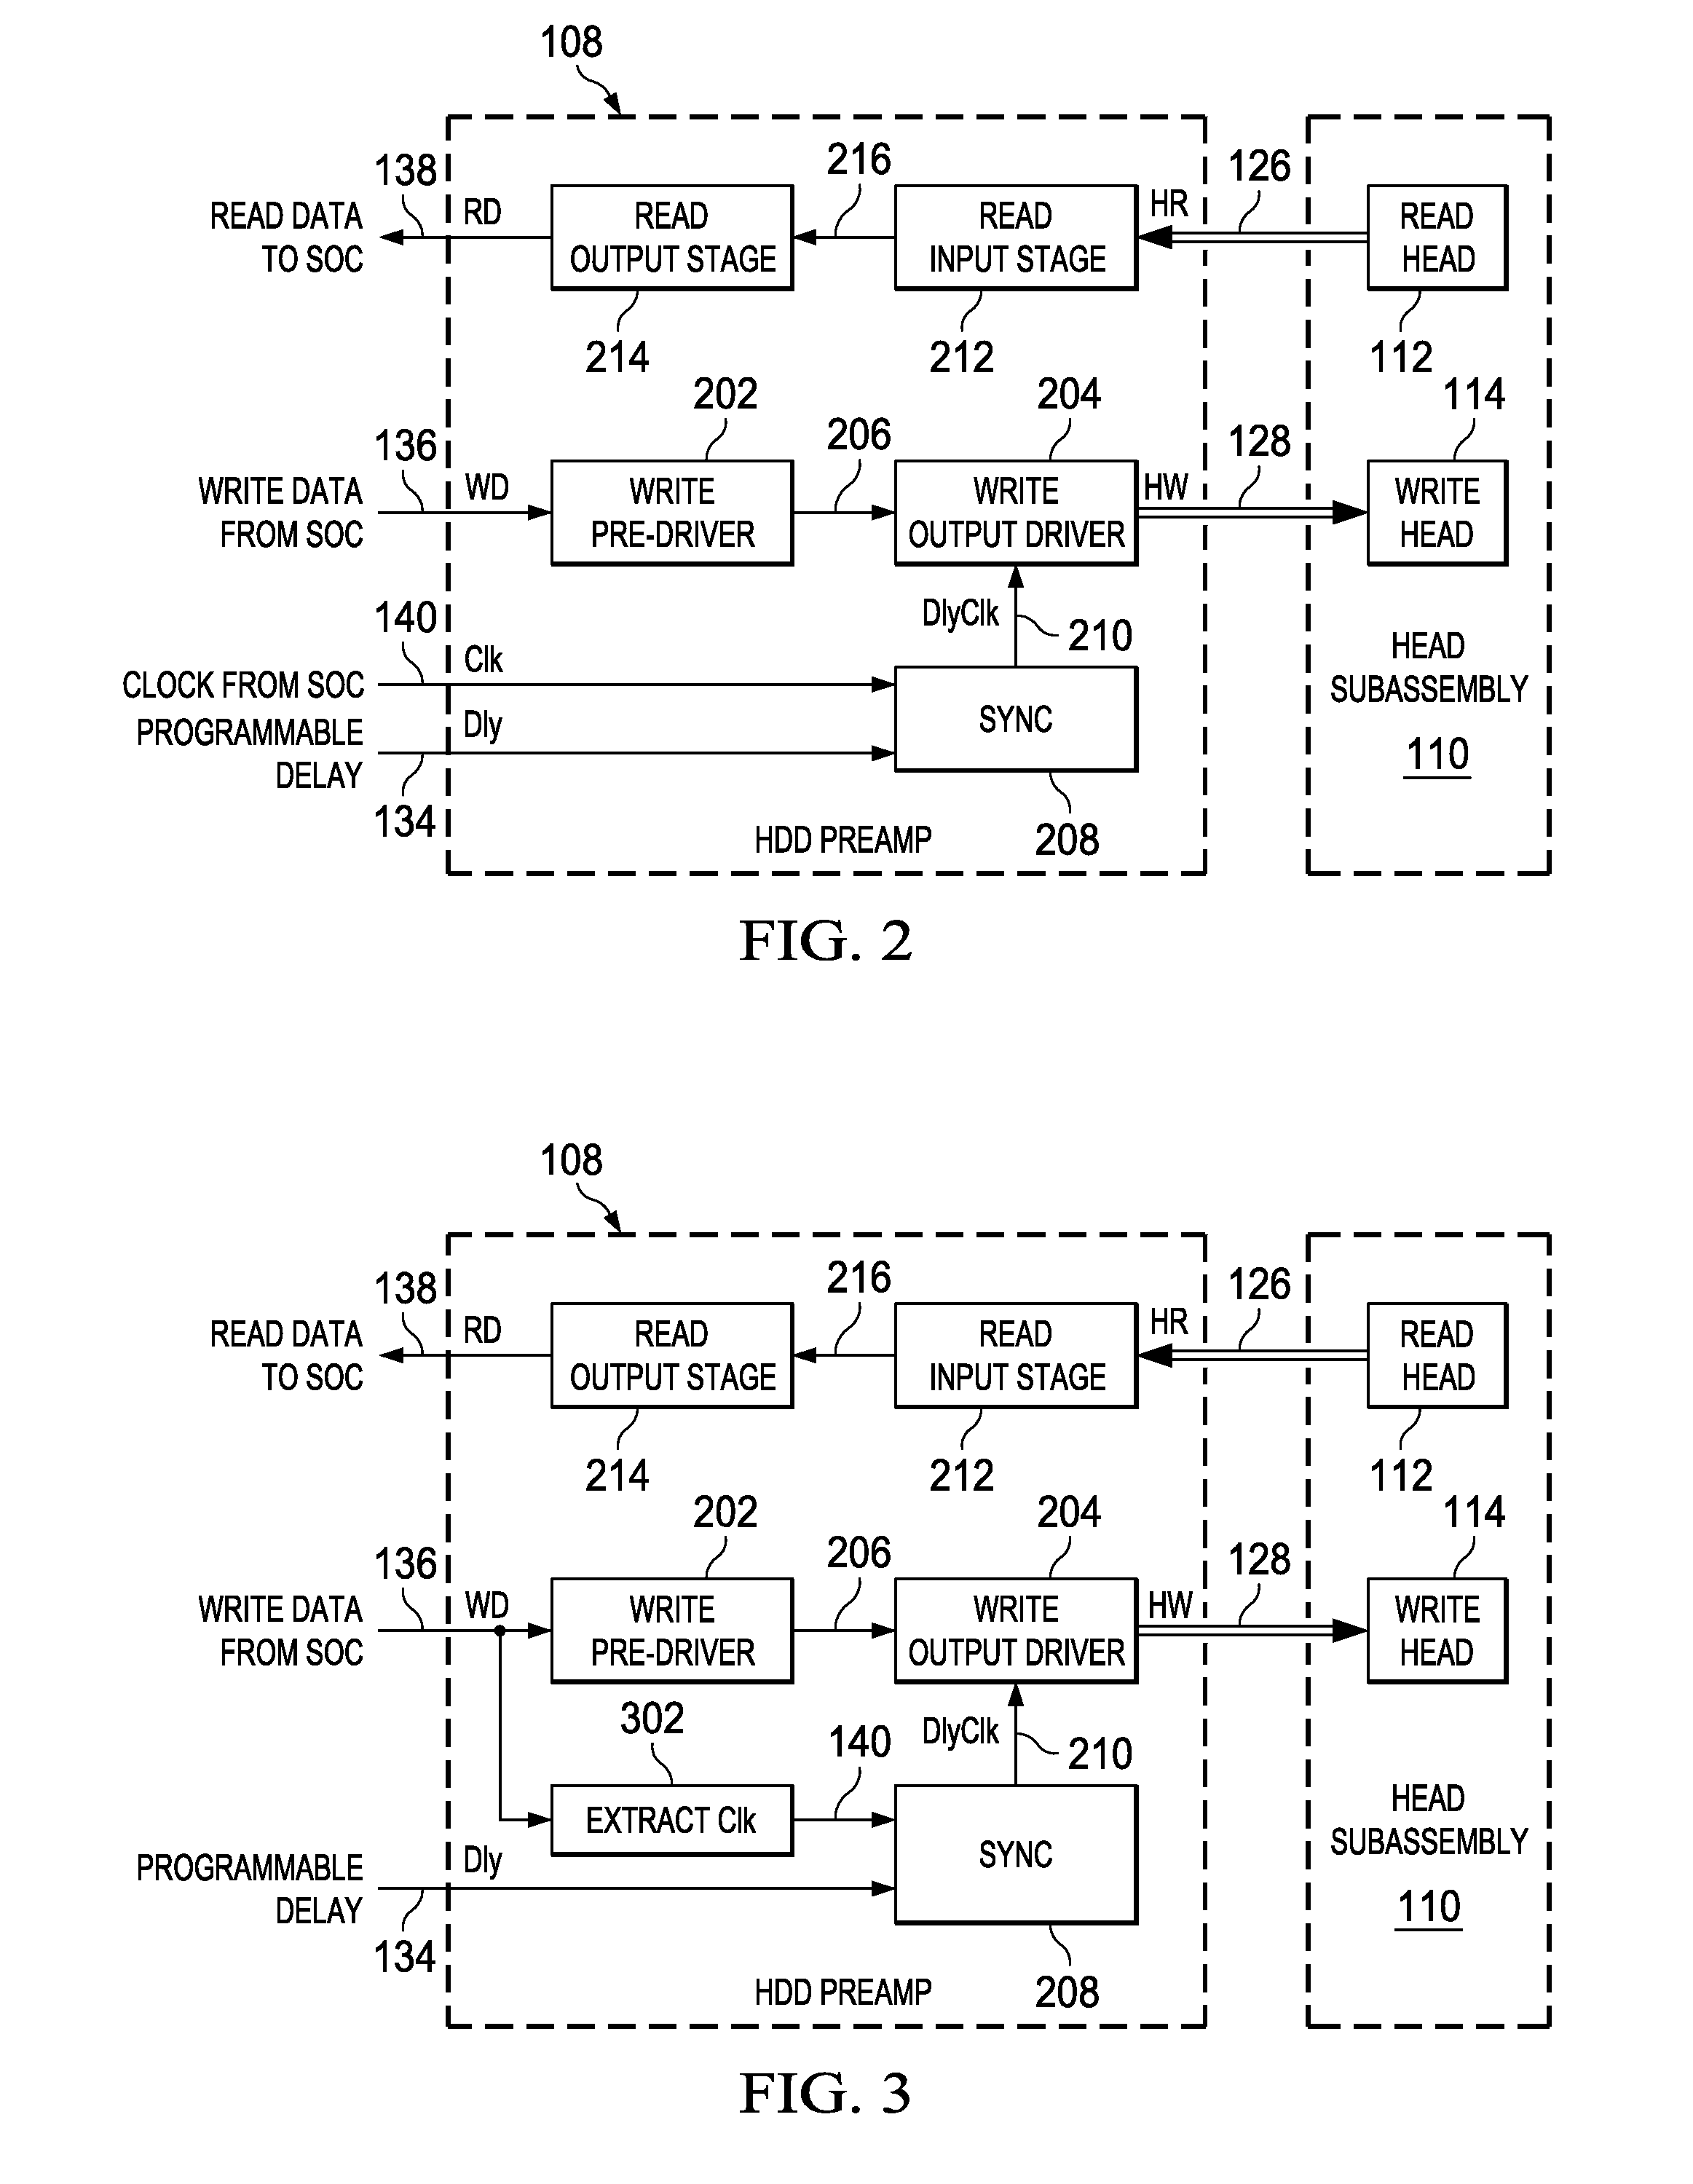 Preamplifier and method for synchronization with bit patterned media